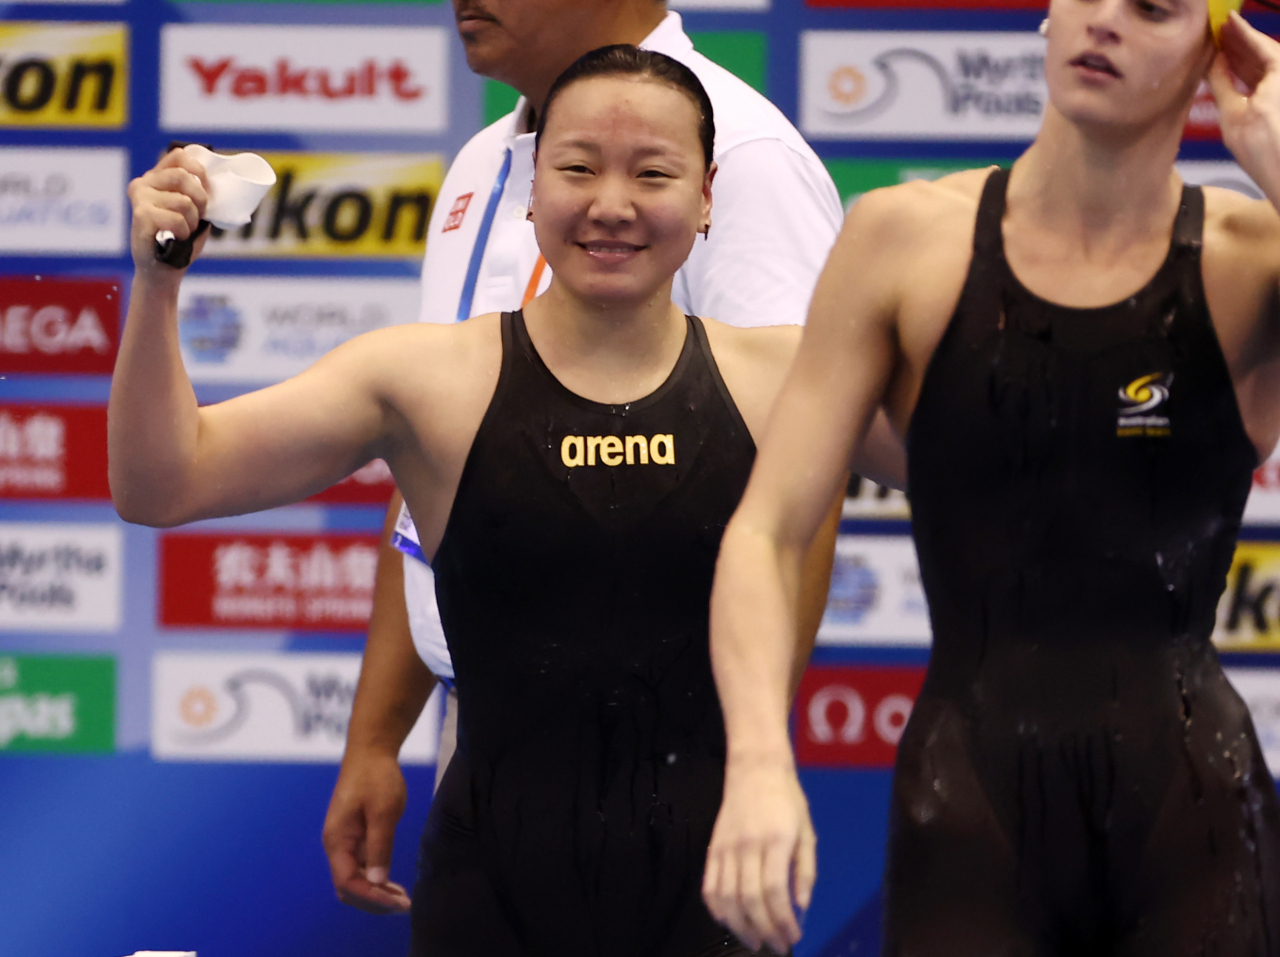 Lee Eun-ji of South Korea (left) reacts after competing in the heats for the women's 200-meter backstroke at the World Aquatics Championships at Marine Messe Fukuoka Hall A in Fukuoka, Japan, on Friday. (Yonhap)